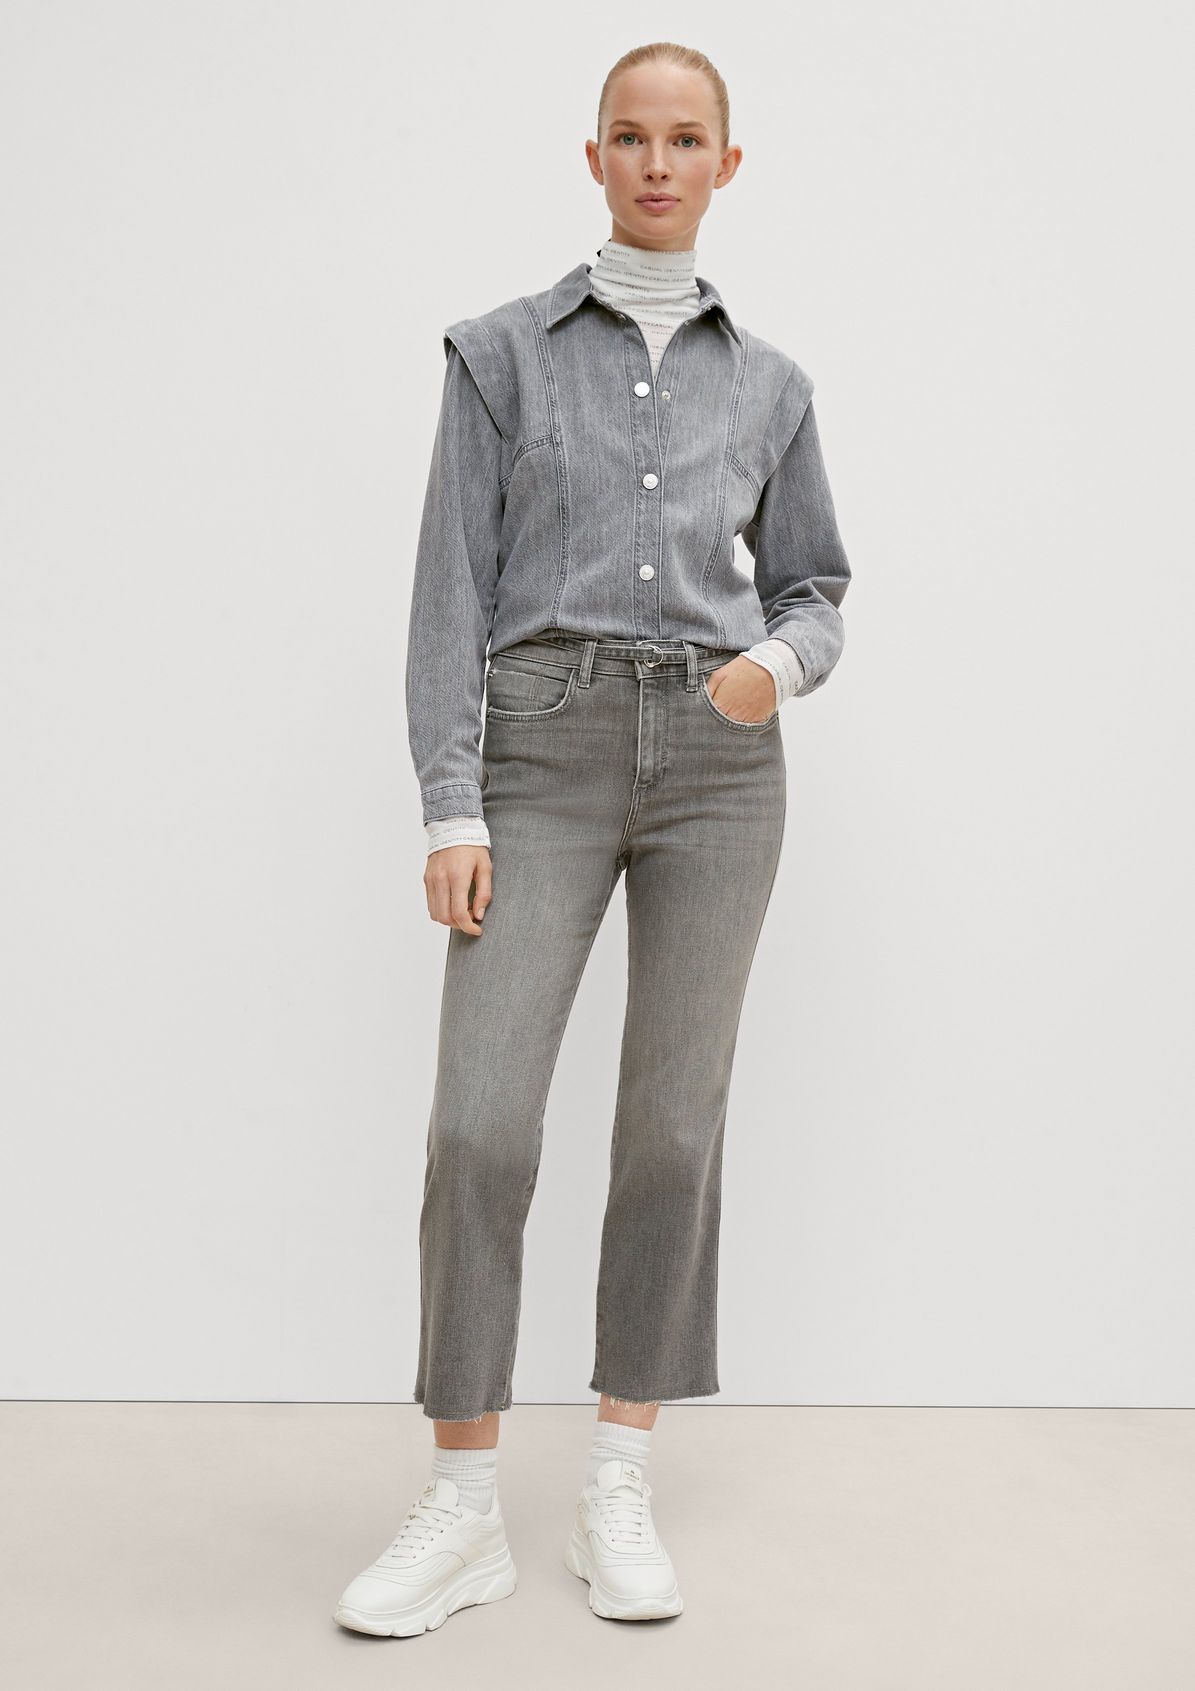 Denim blouse from comma